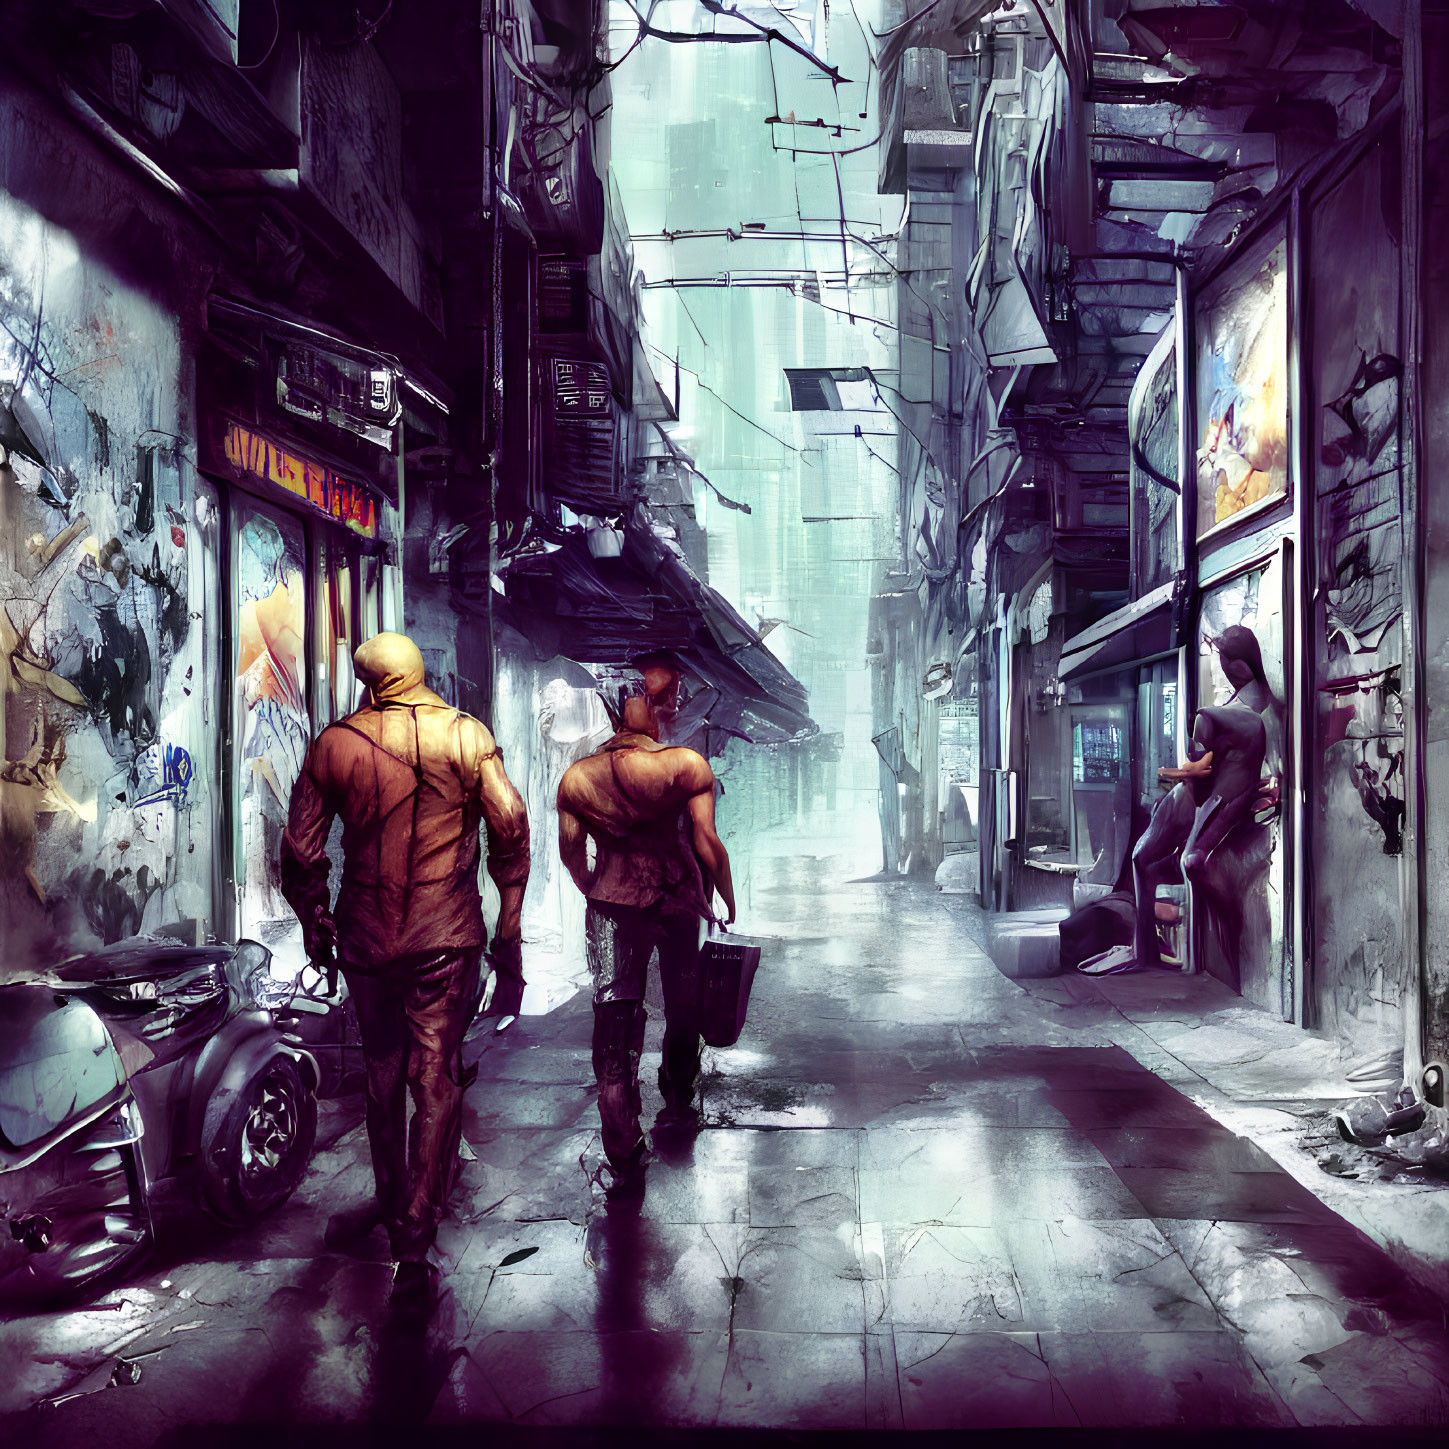 Dystopian alley with graffiti, dilapidated buildings, and futuristic motorcycle